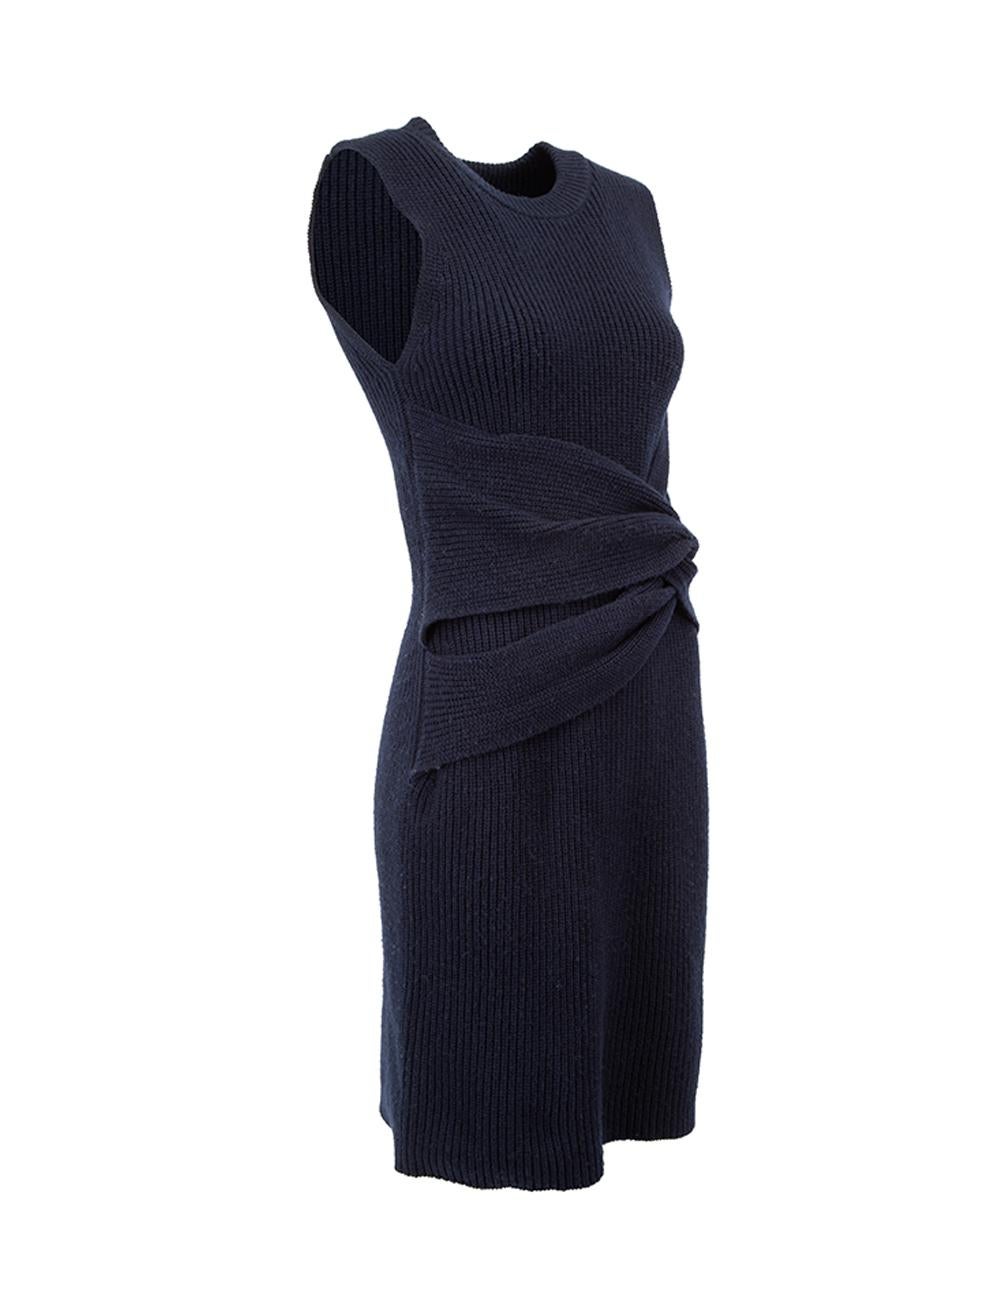 CONDITION is Very good. Hardly any visible wear to dress is evident on this used 3.1 Philip Lim designer resale item. 



Details


Navy

Wool

Mini knit dress

Round neckline

Twist accent





Made in China



Composition

74% Wool and 26%